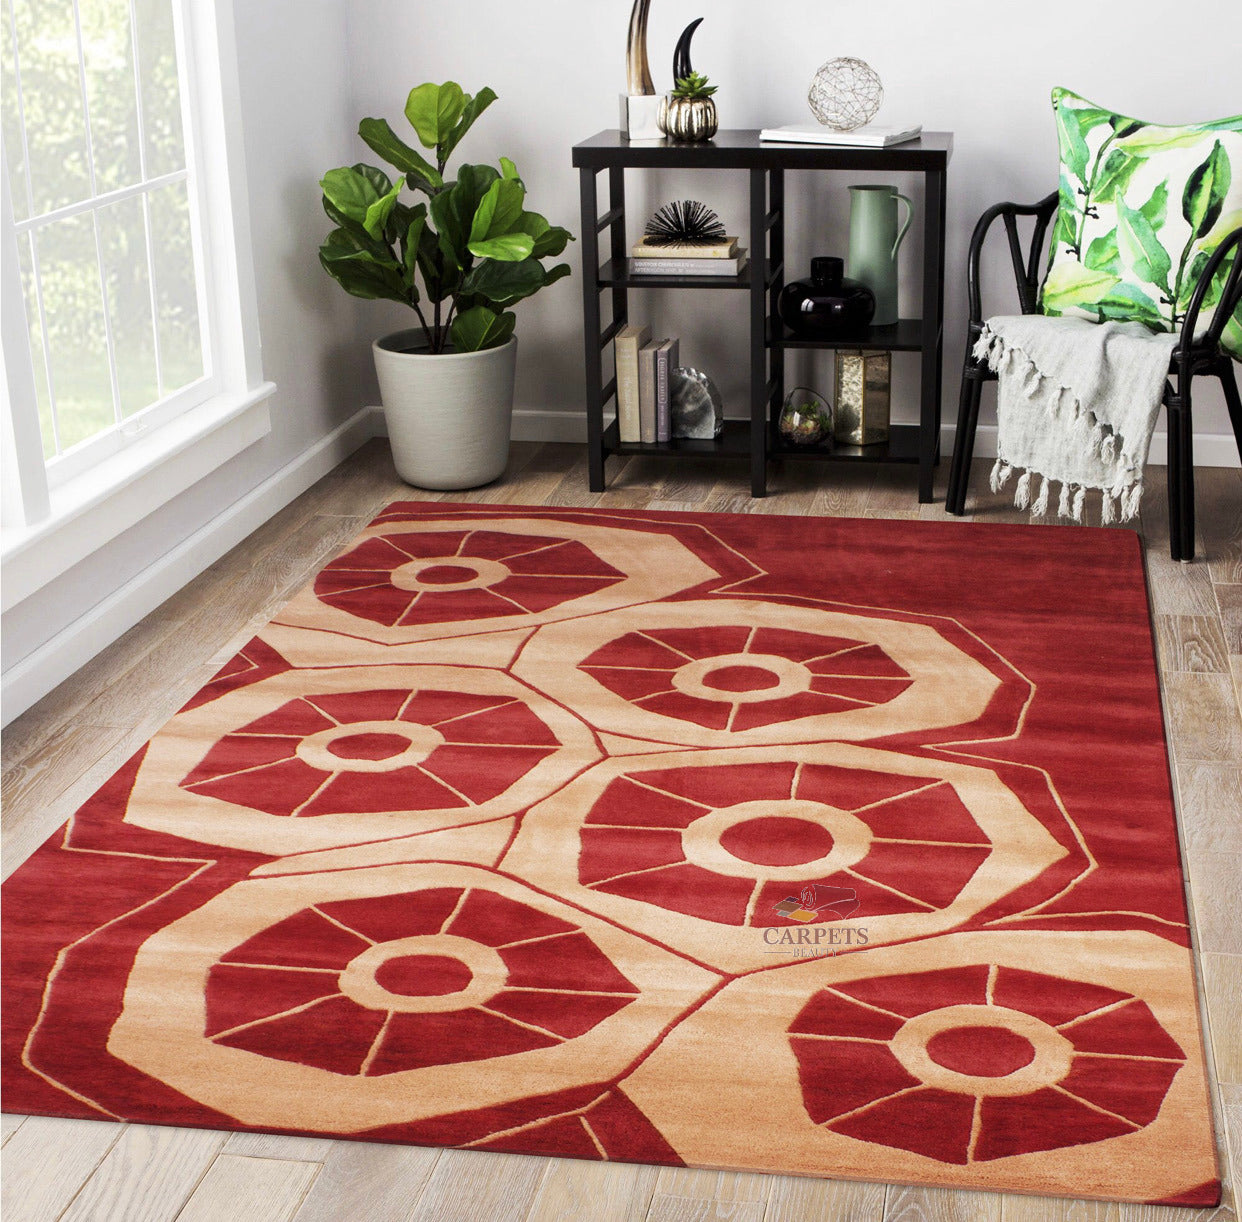 Beautiful Red Geometric Woolen Rug for bedrooms and living rooms